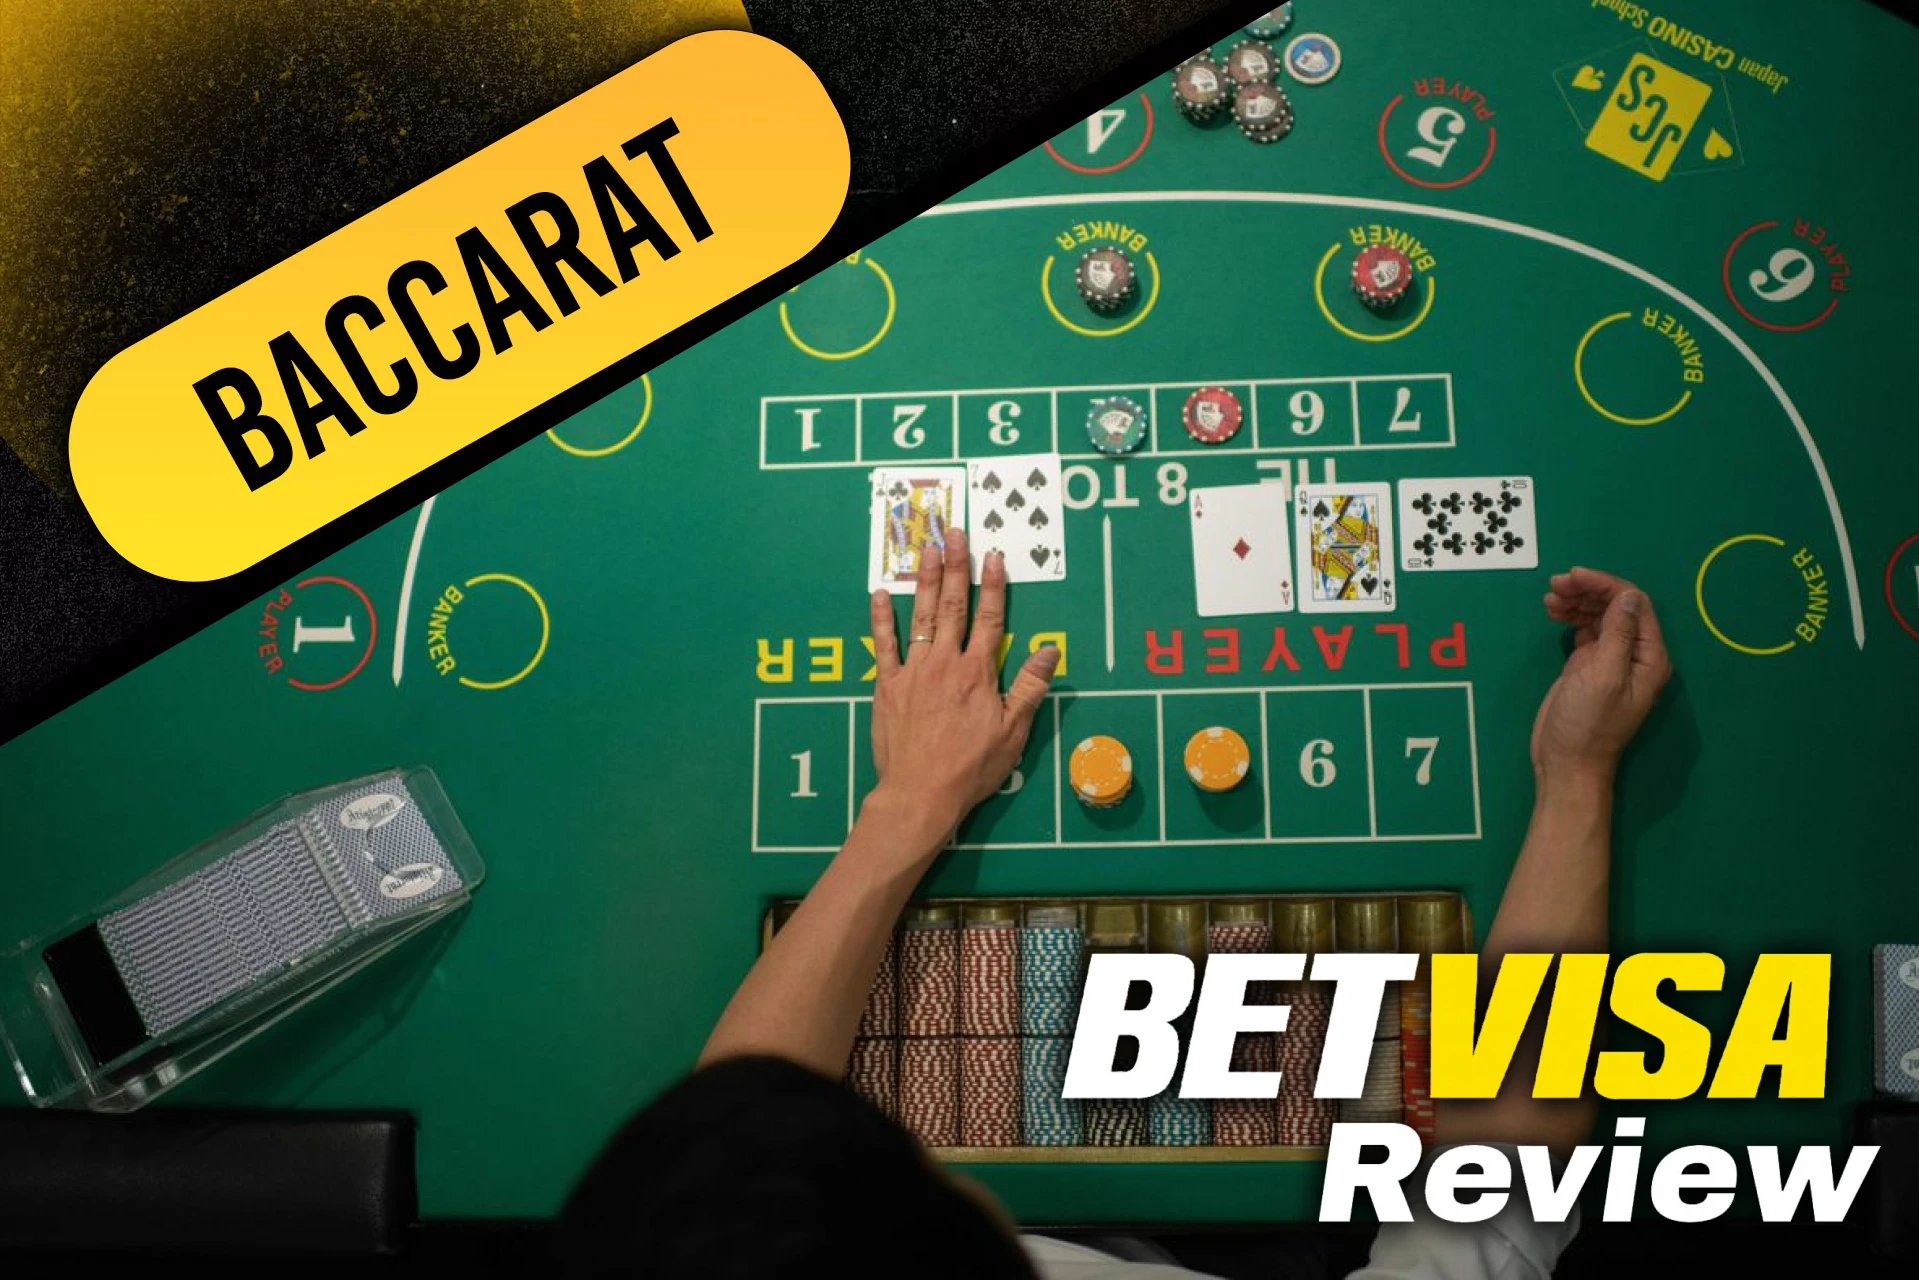 There are baccarat games at BetVisa.